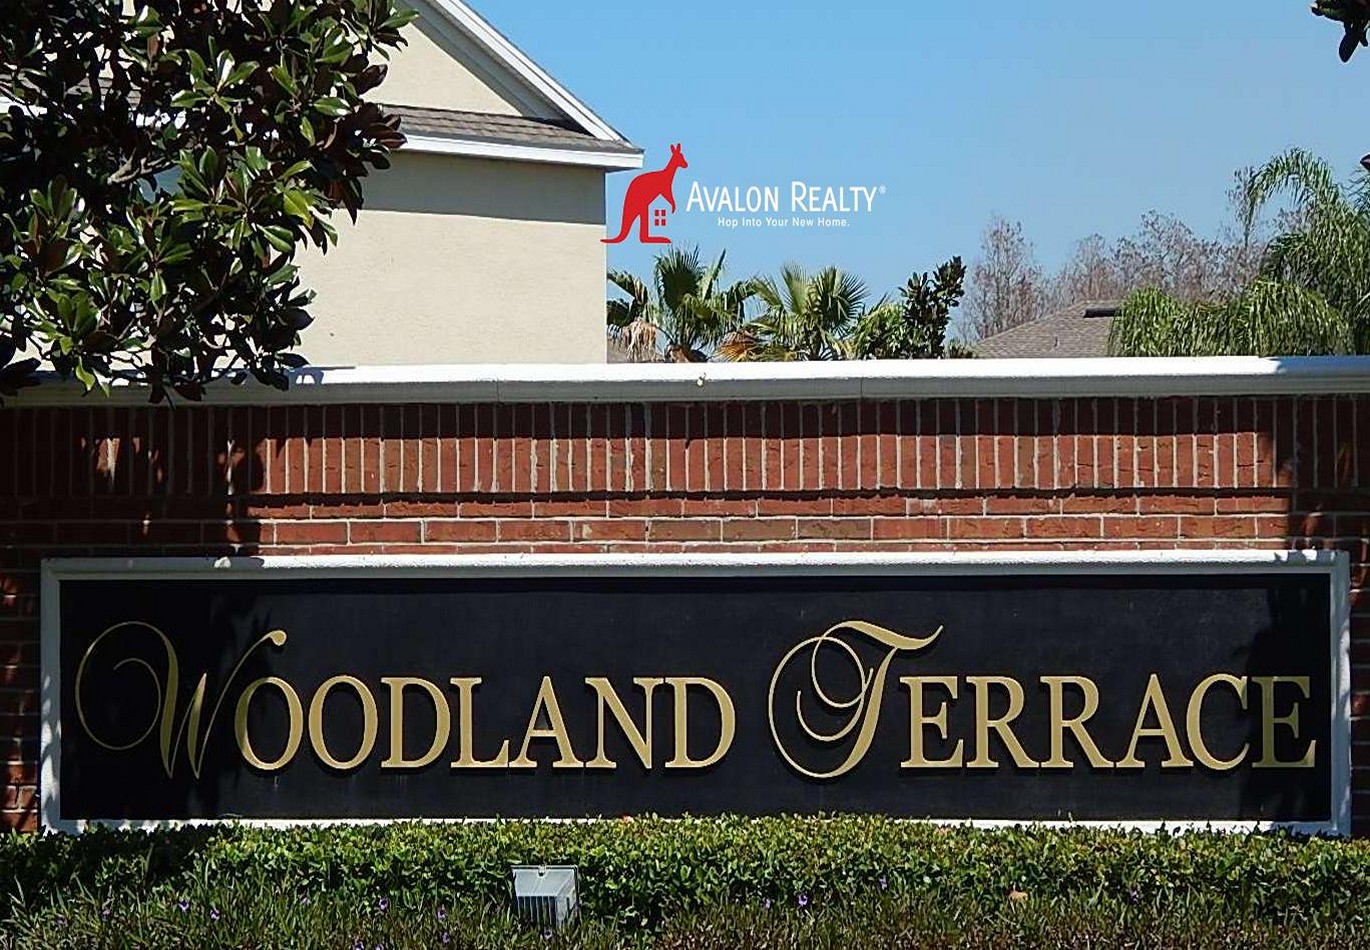 Woodland Terrace town homes for sale